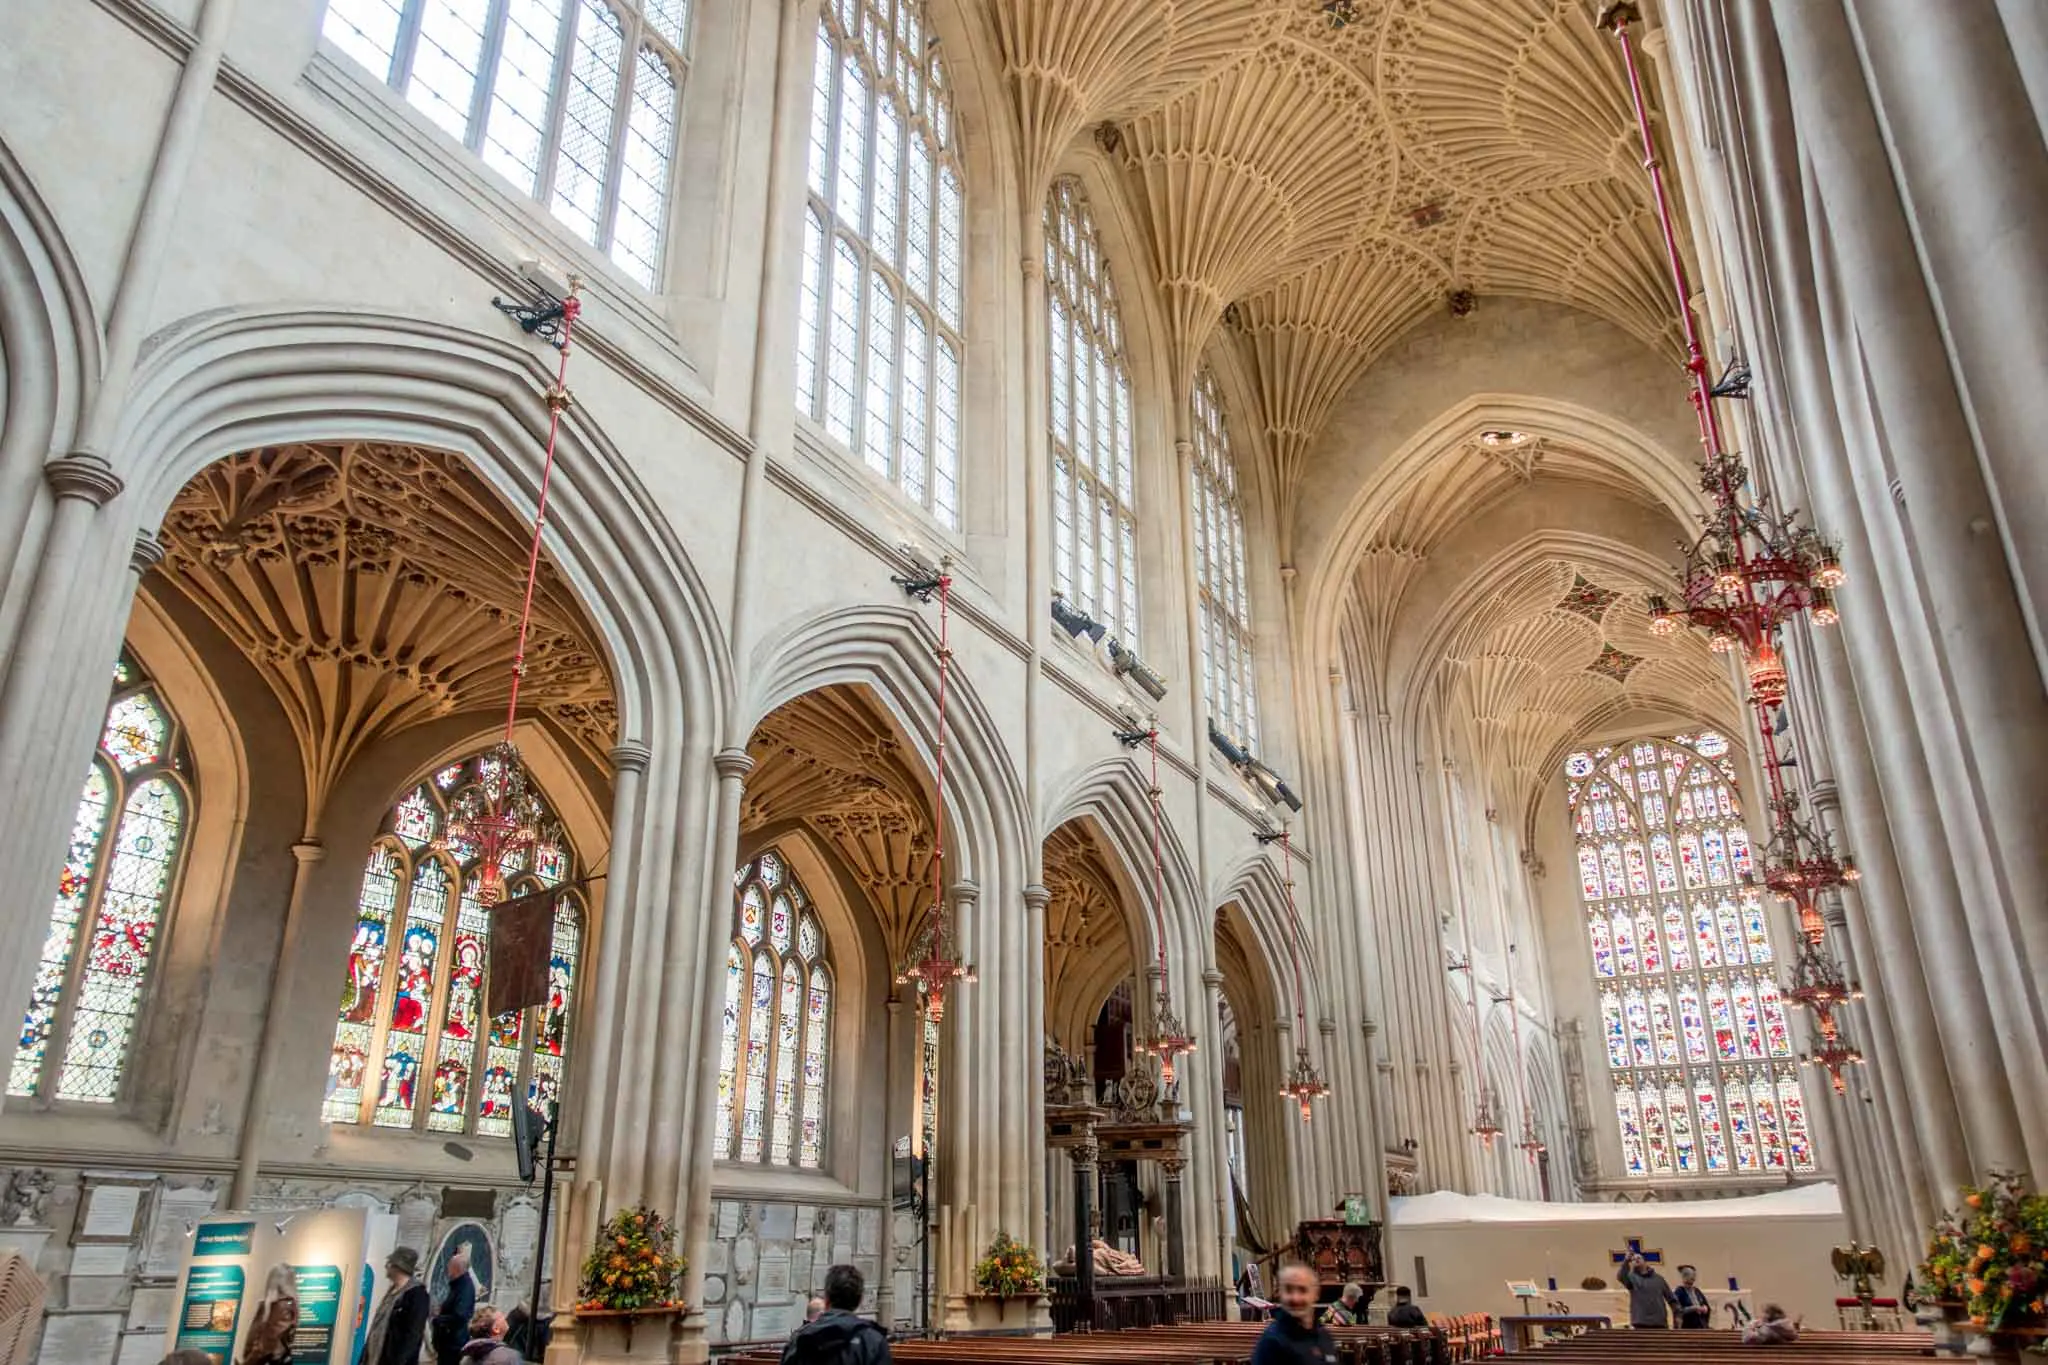 Stained glass windows and vaulted ceilings inside Bath Abbey in England